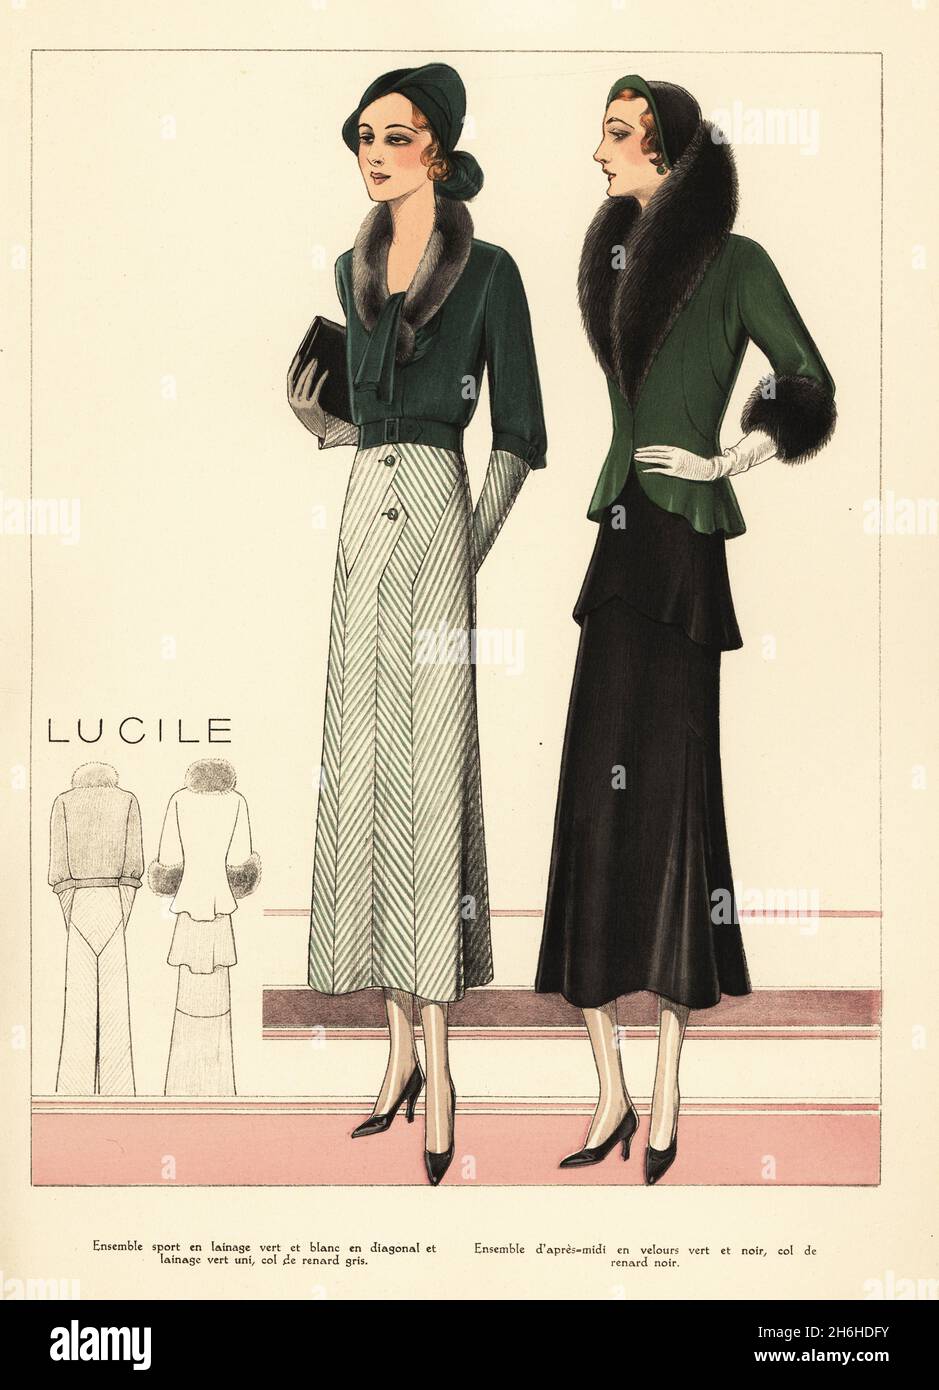 Woman in sport outfit in green-and-white diagonal skirt, plain green wool jacket with grey fox collar. Afternoon suit in green and black velvet, black fox collar. Marcel wave bob hairstyles. Fashions by Lucile, maison founded by Lucy Christiana, Lady Duff-Gordon. Handcoloured pochoir lithograph from La Grande Couture, Creations pour la Femme Mondaine, Atelier Bachwitz, publisher of Chic Parisien, Vienna, September, 1931. Stock Photo